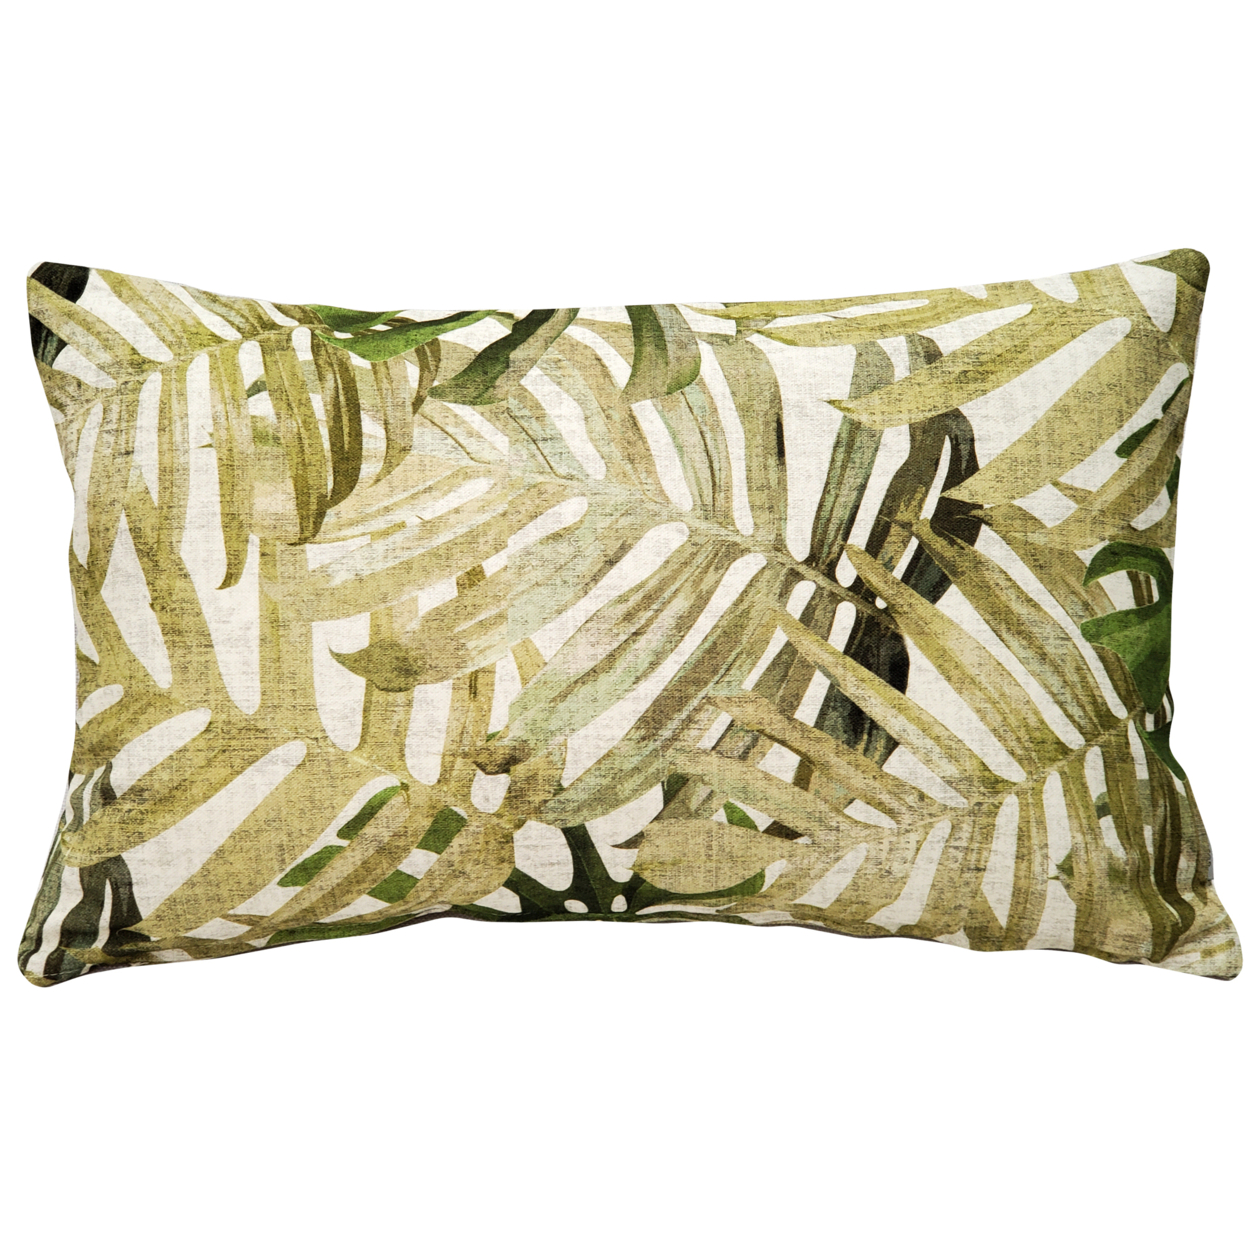 Pattaya Green Palm Throw Pillow 12x20 Inches Square, Complete Pillow With Polyfill Pillow Insert